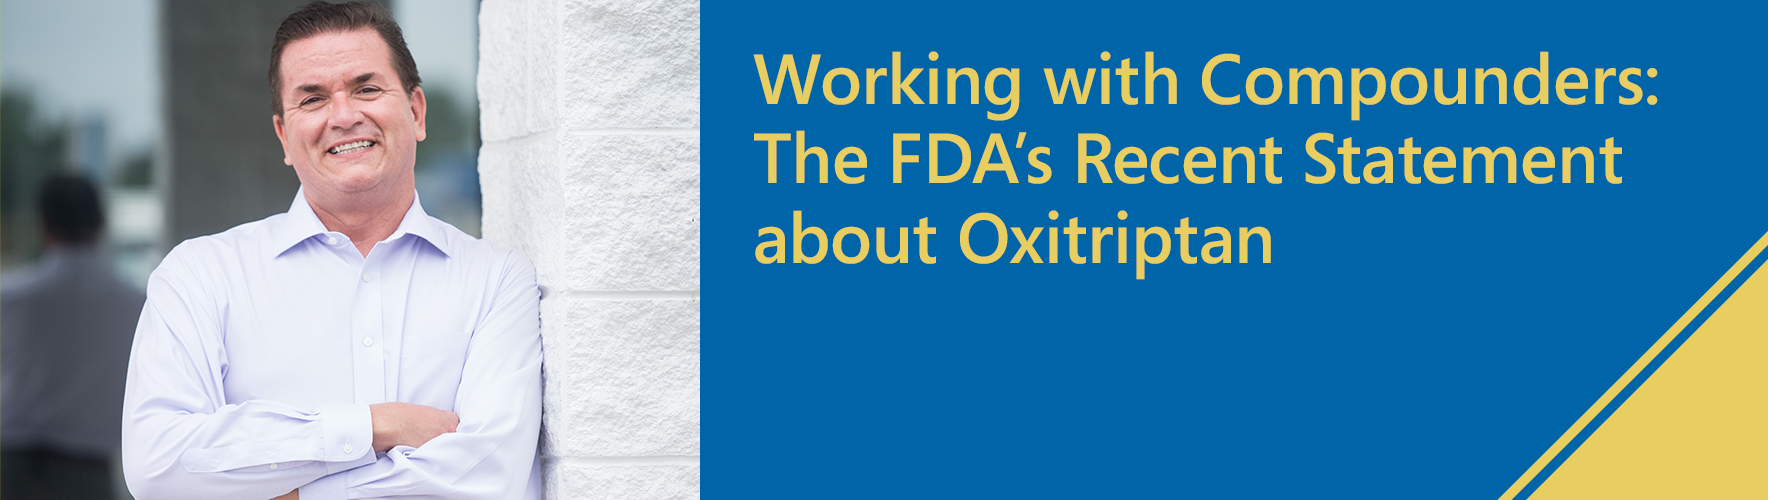 Working_with_compounders_the_fdas_recent_statement_about_oxitriptan.png.